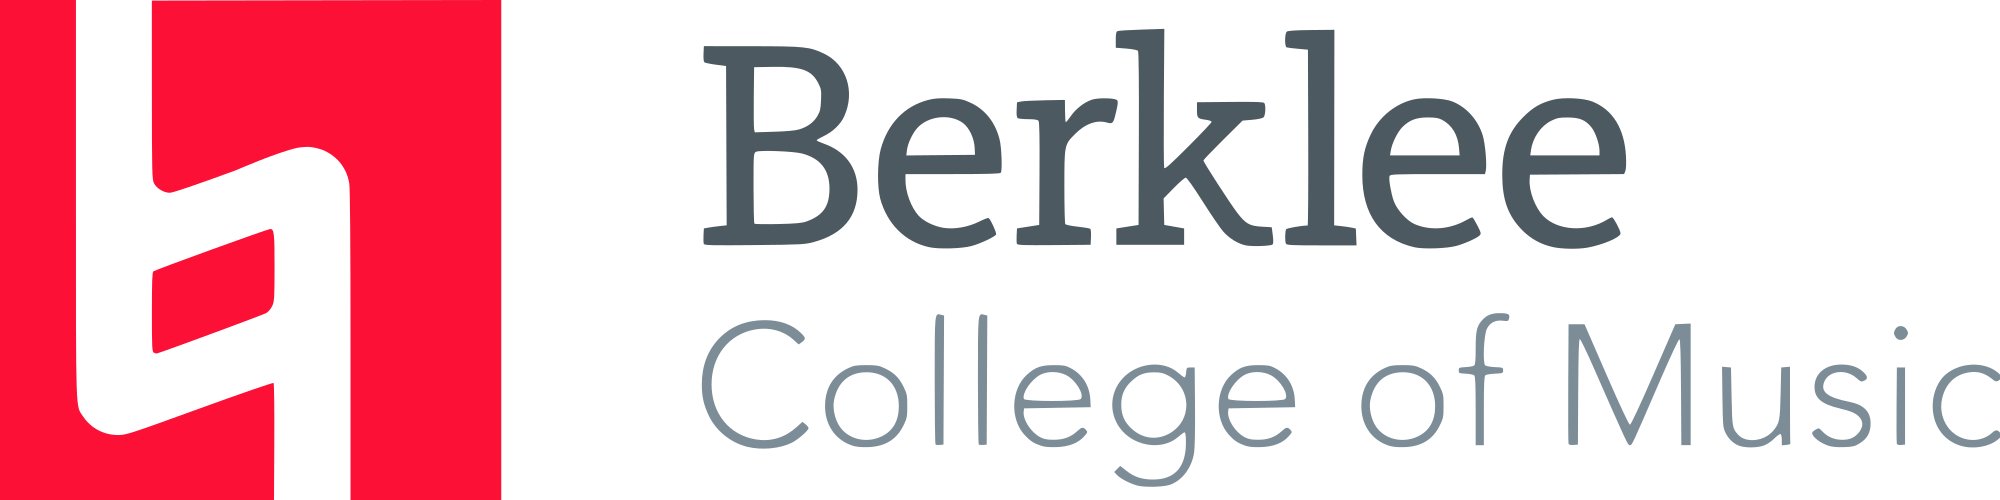 /assets/contentimages/berklee_college_of_music_logo.png